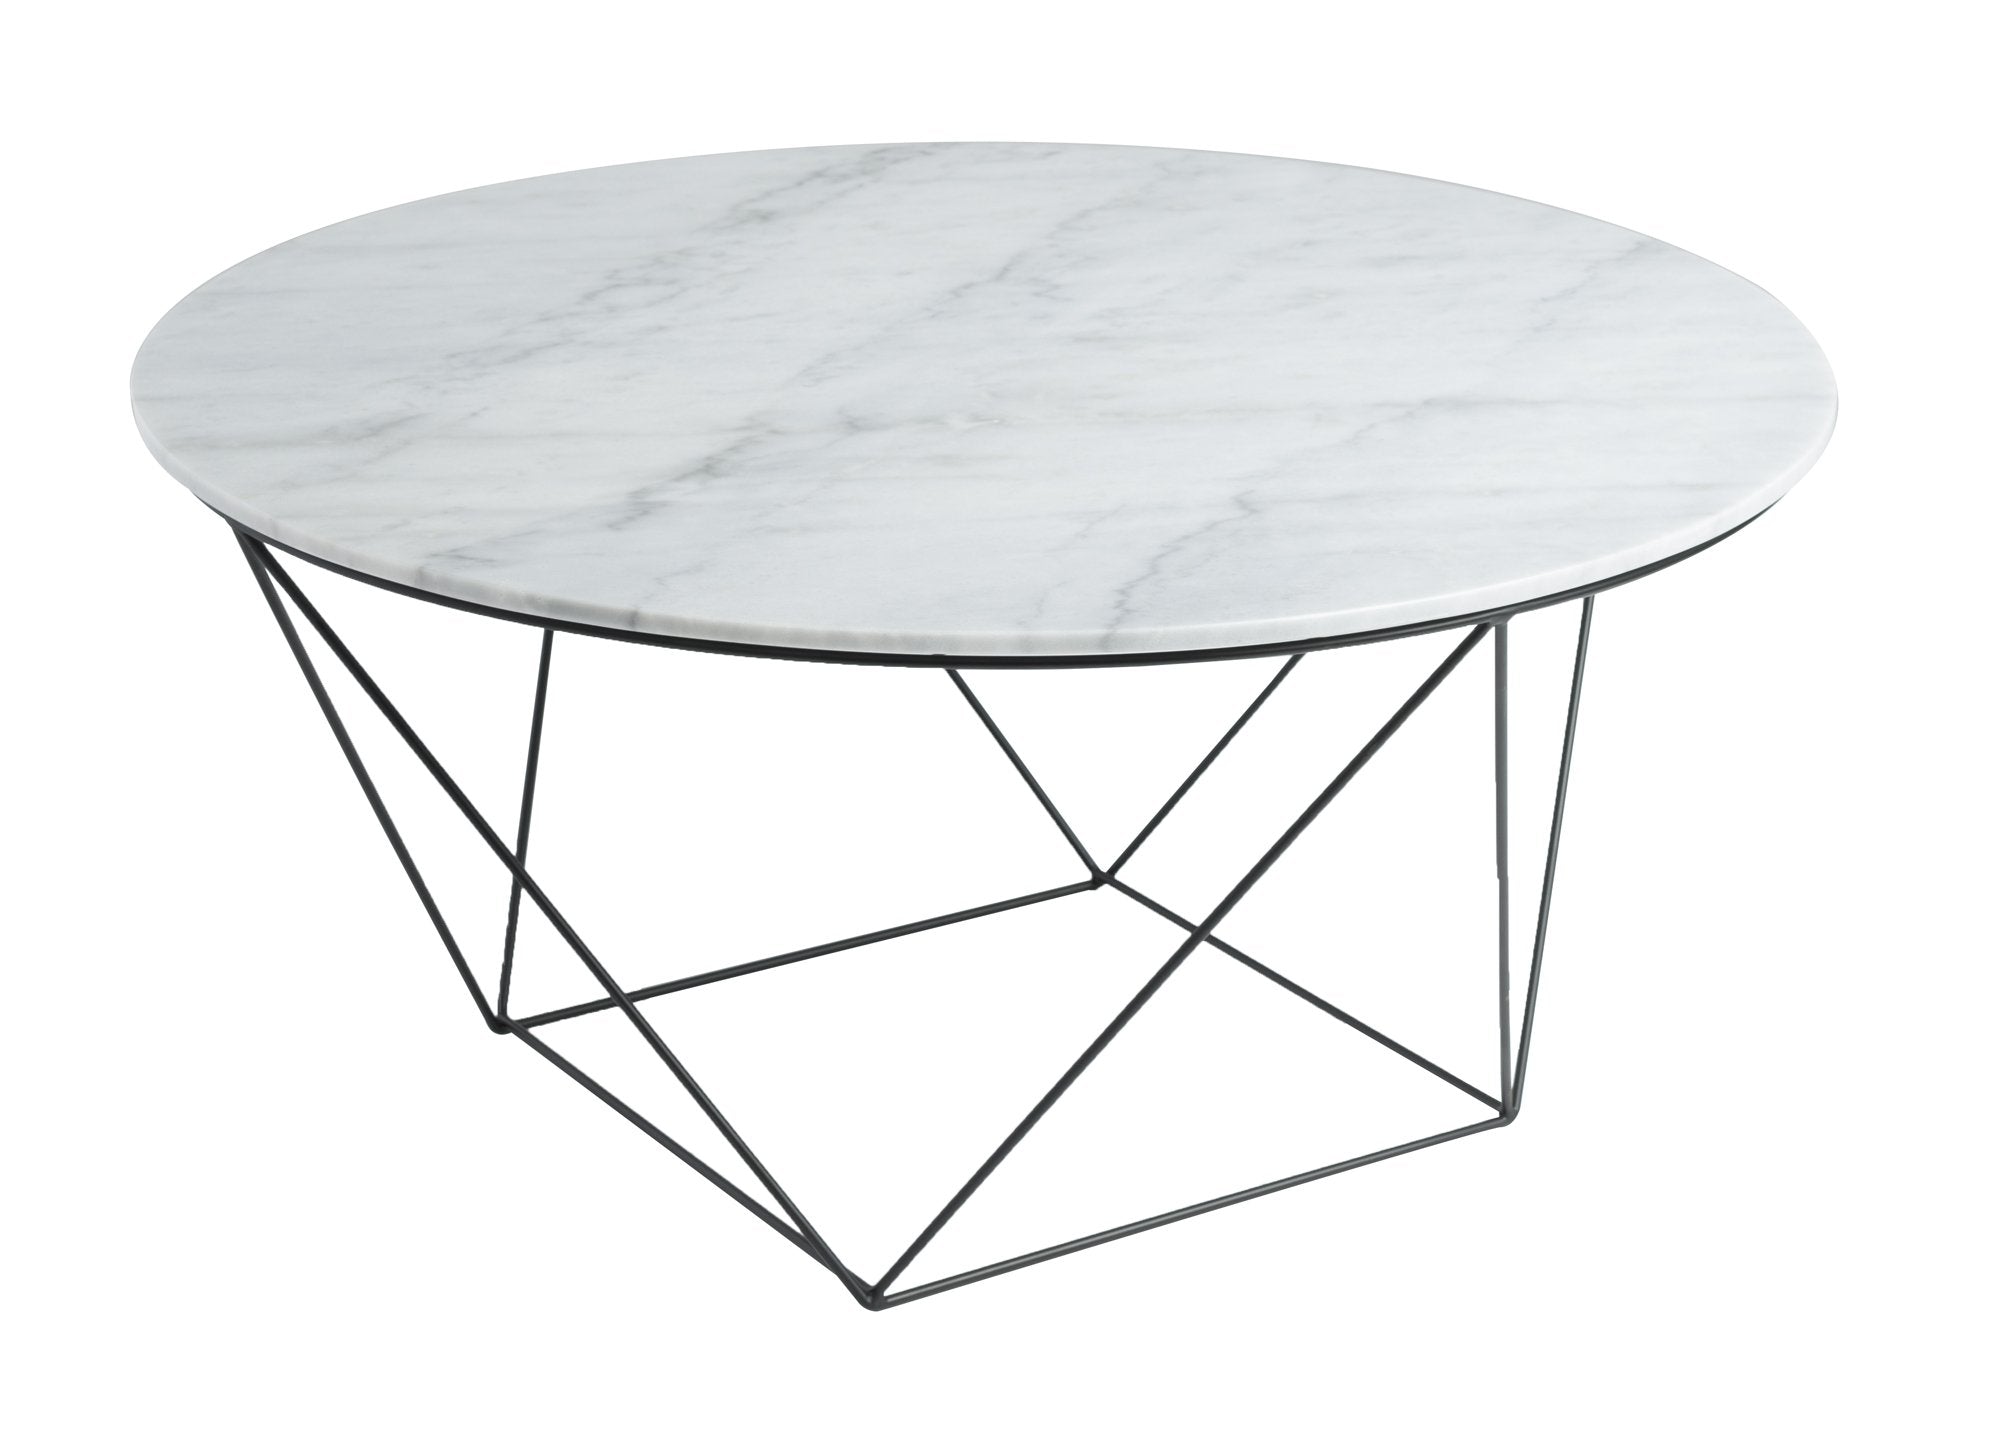 Picture of Valencia Round Coffee Table - White Marble/Black Matte